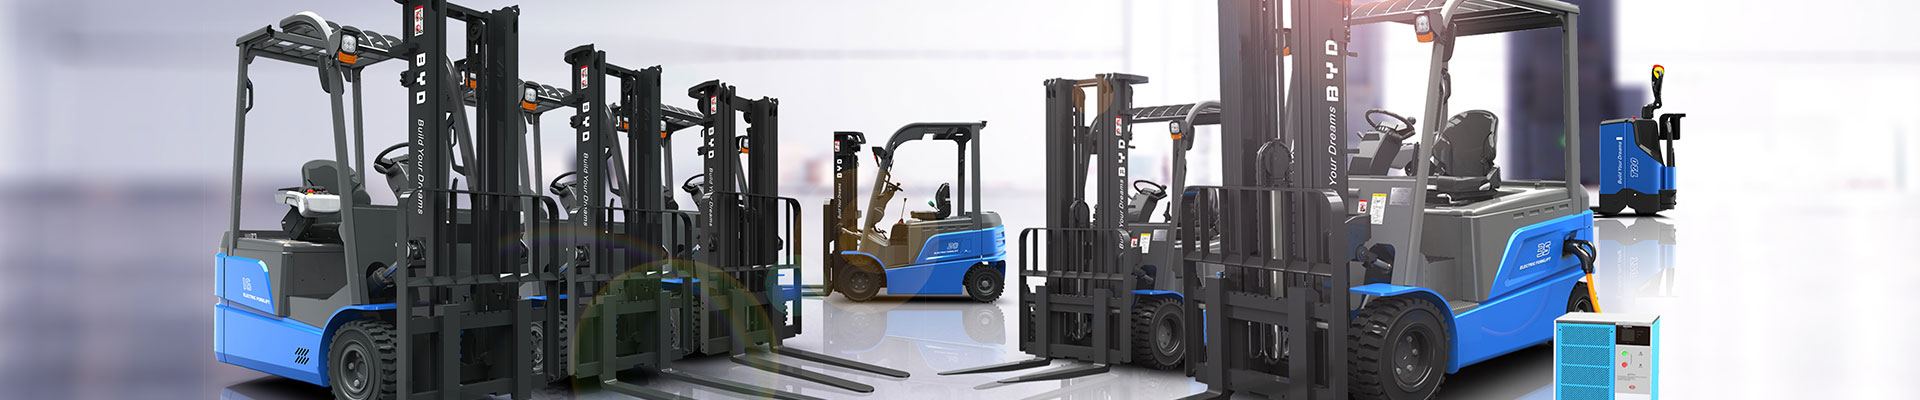 BYD electric forklifts that help promote sustainability